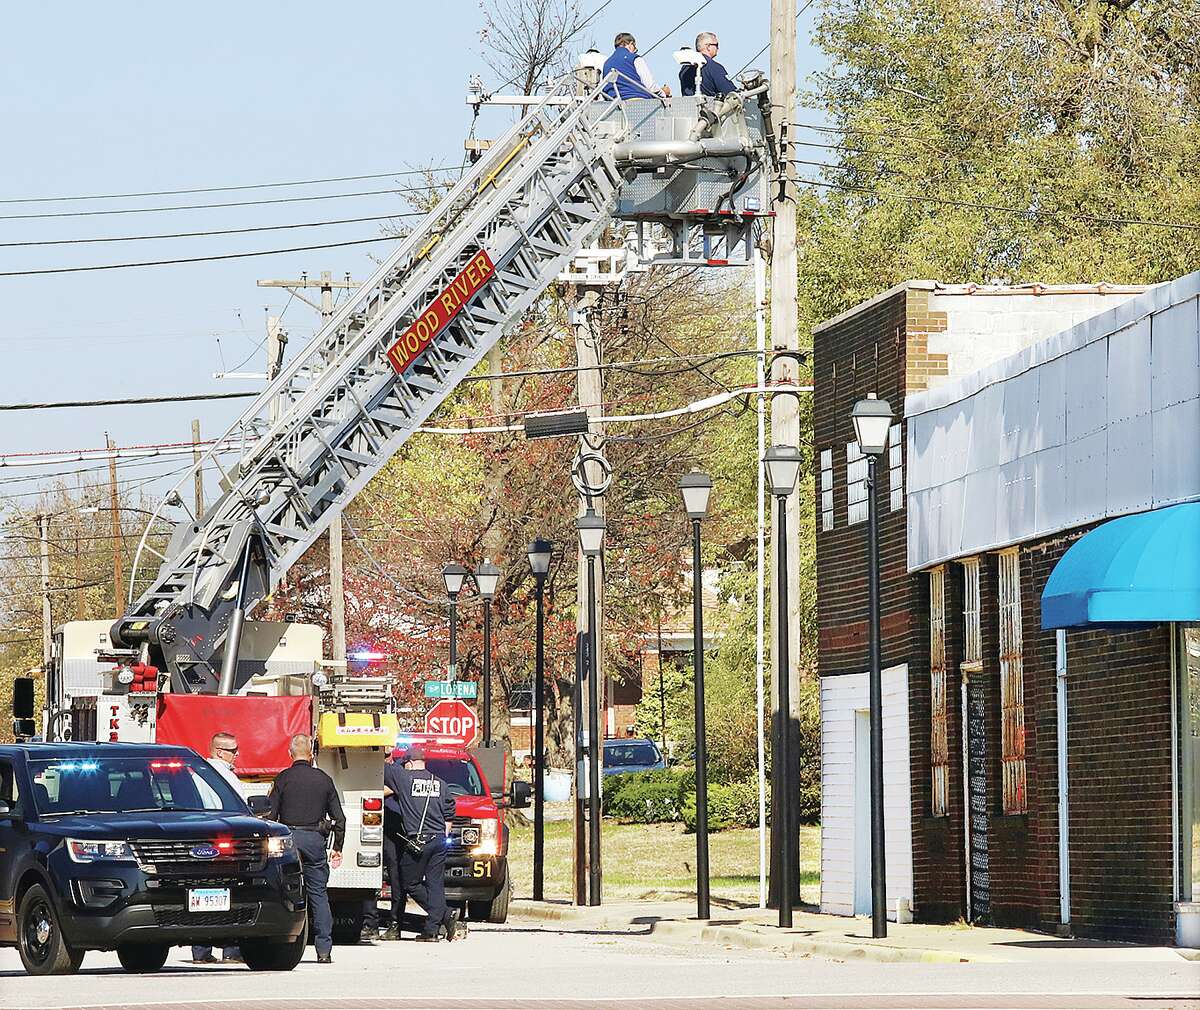 John Badman|The Telegraph Building inspectors in Wood River received a little help from the fire department this week with a few building inspections in the downtown area. Firefighters gave an inspector a ride in the bucket of their ladder truck so they could photograph and document the conditions of buildings on Ferguson Avenue and some streets just off Ferguson Avenue.